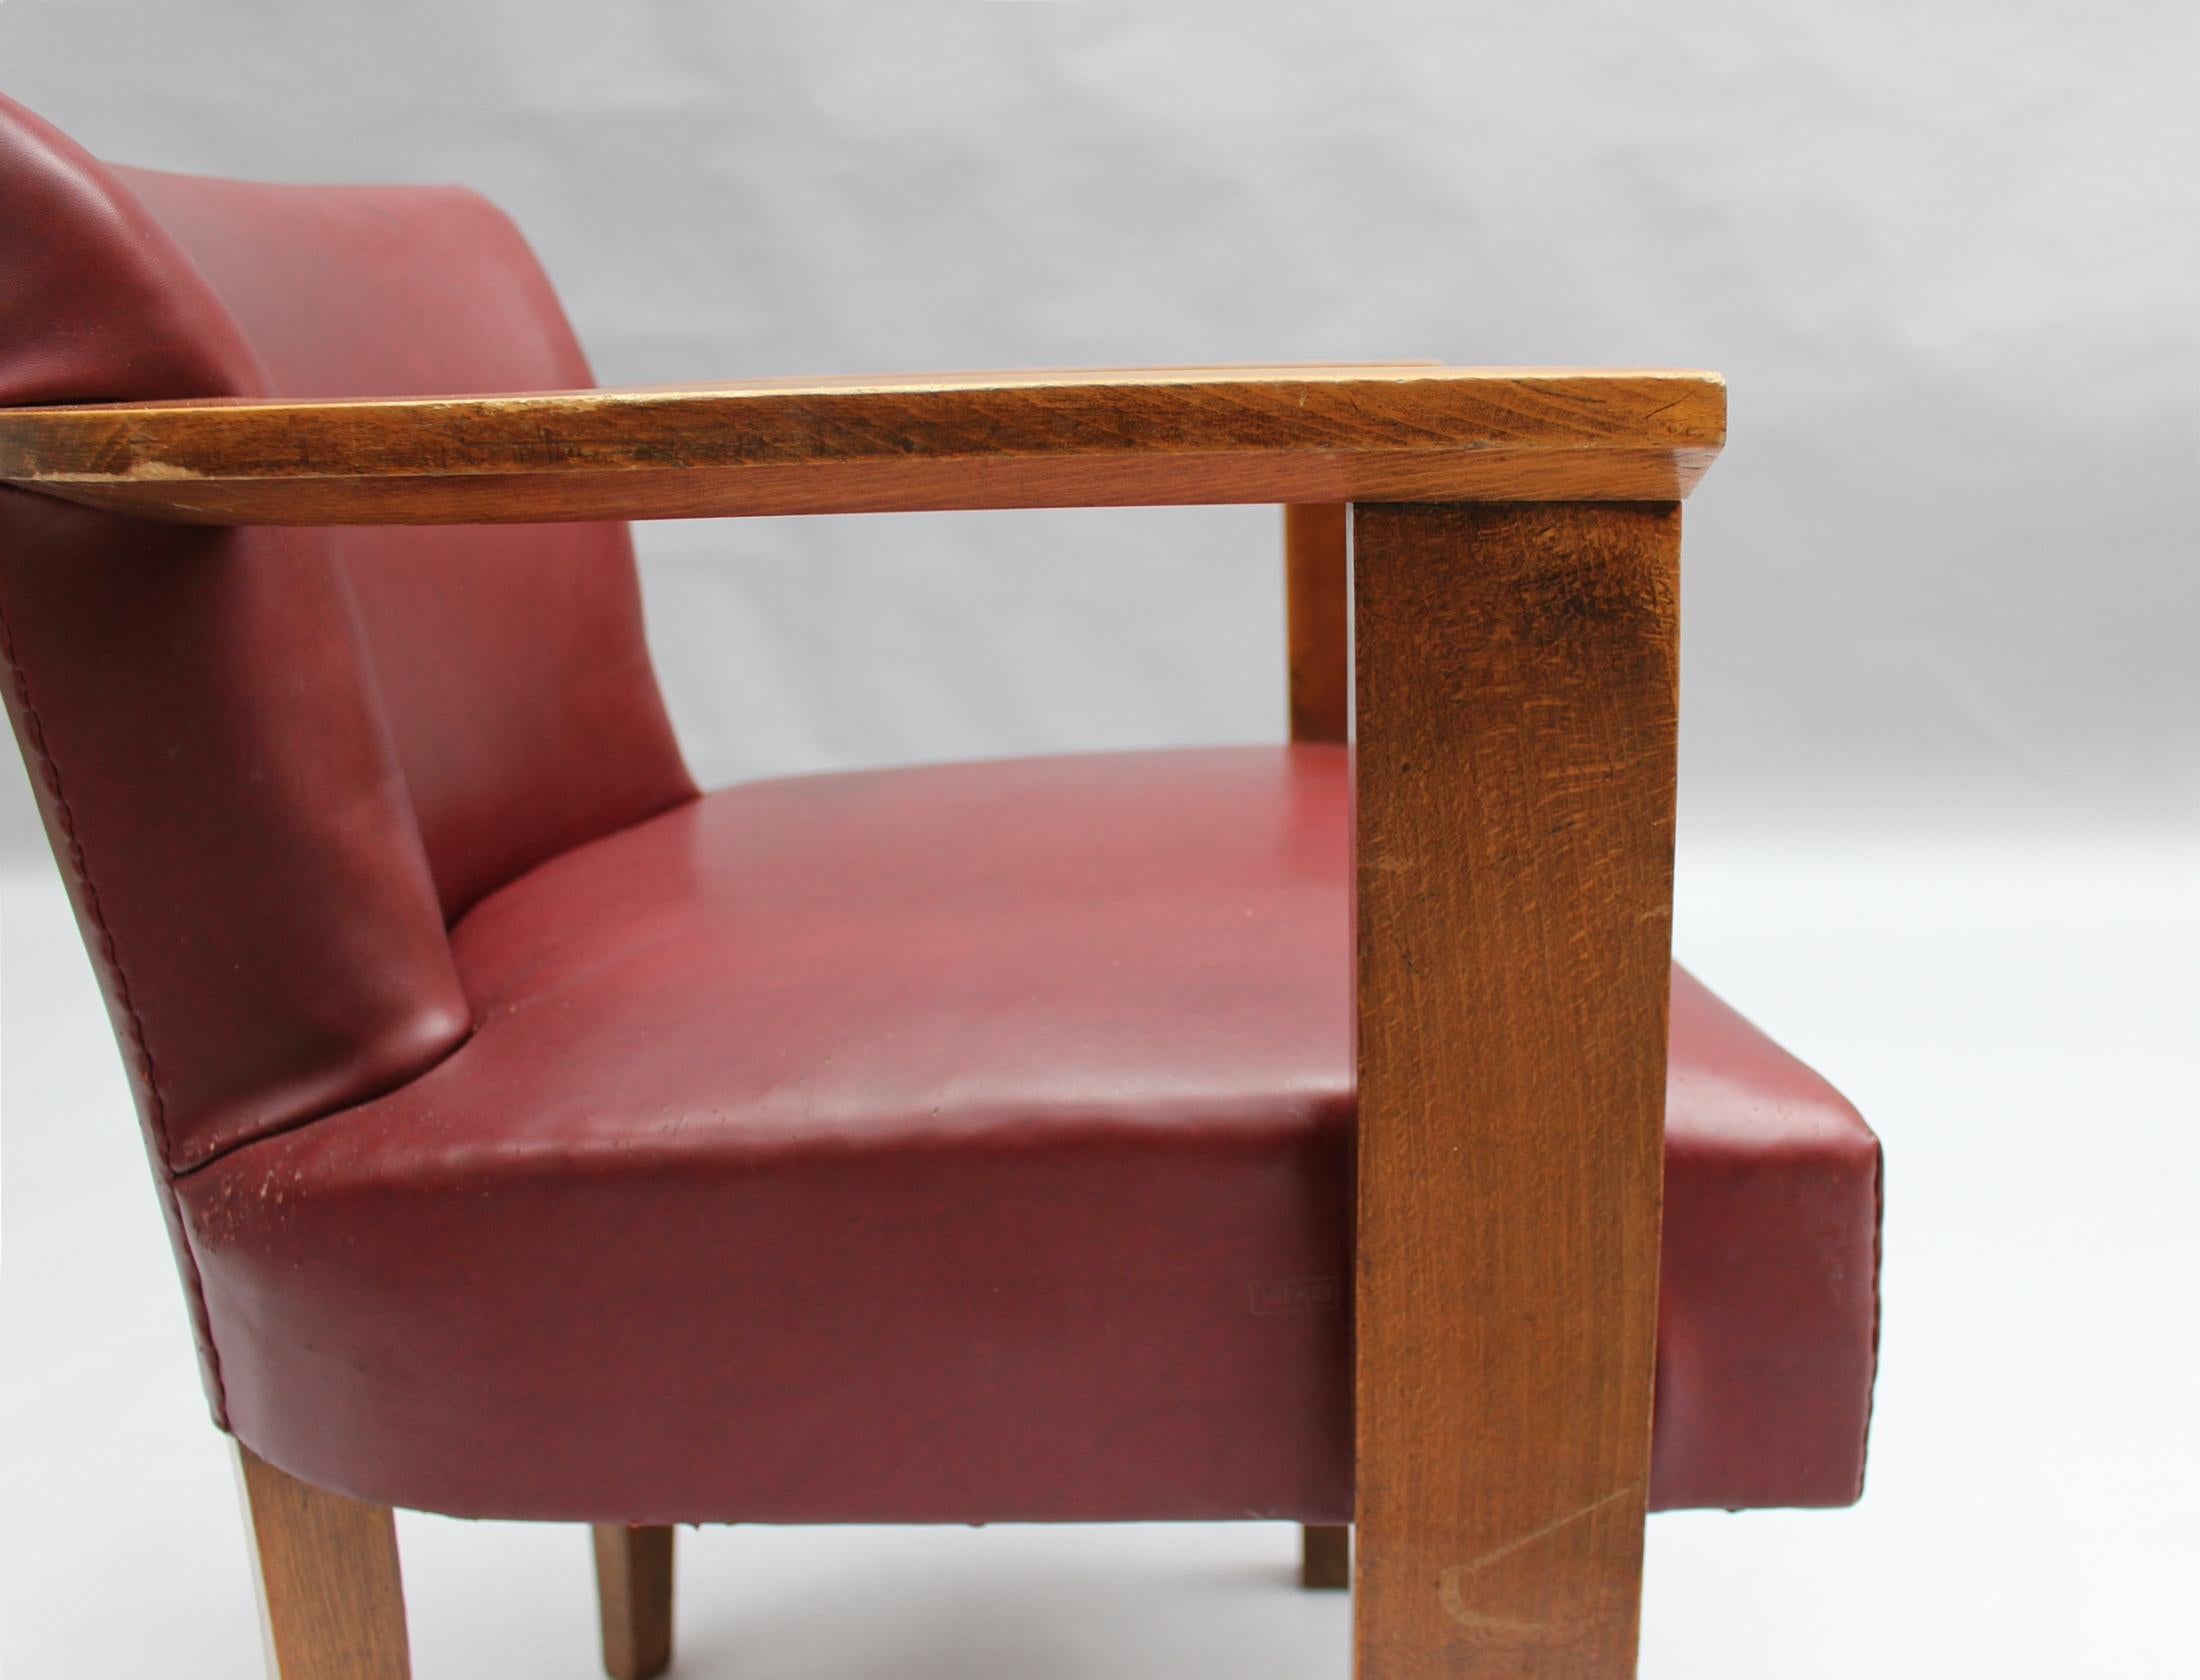 Fine French Art Deco Beech Wood Desk Chair For Sale 5